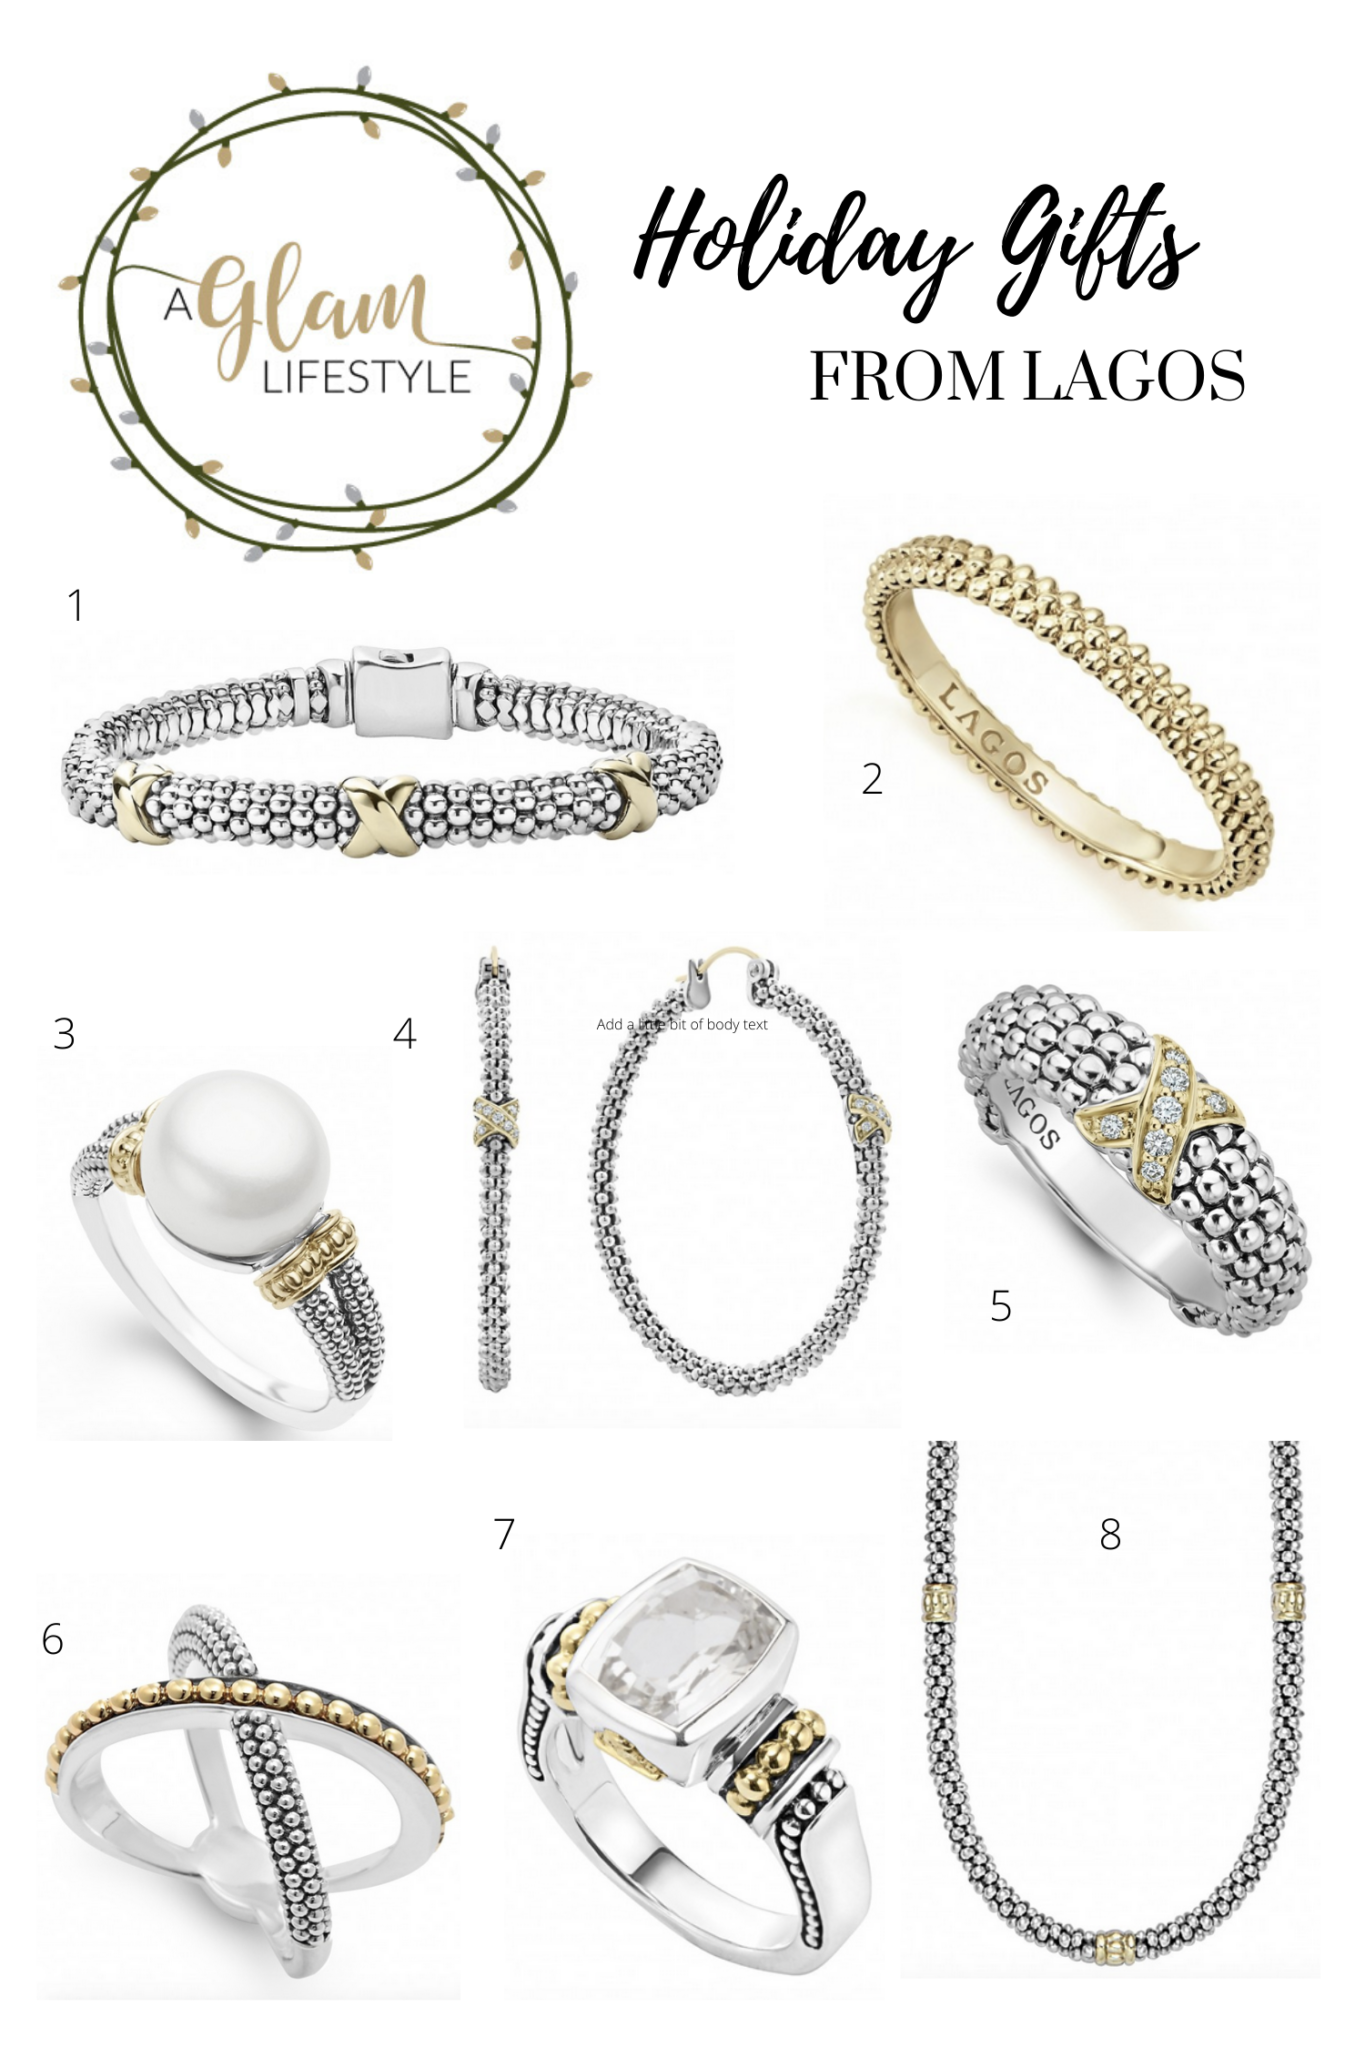 Iconic Holiday Gifts with Lagos Jewelry